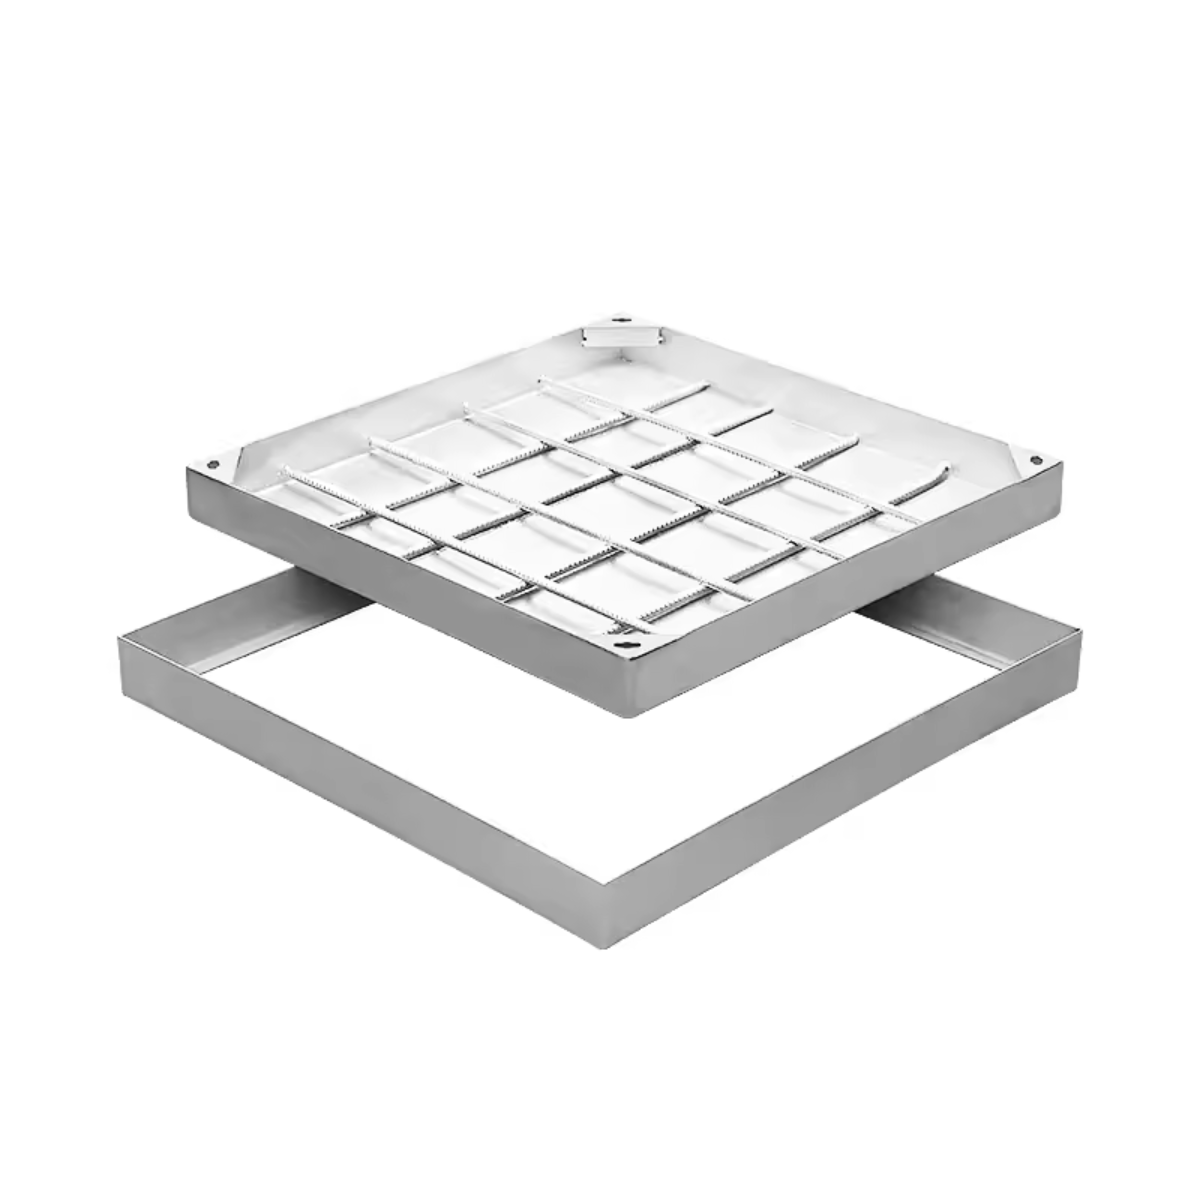 Stainless steel invisible manhole cover Drain cover Manhole cover 201 Square decorative rain manhole cover